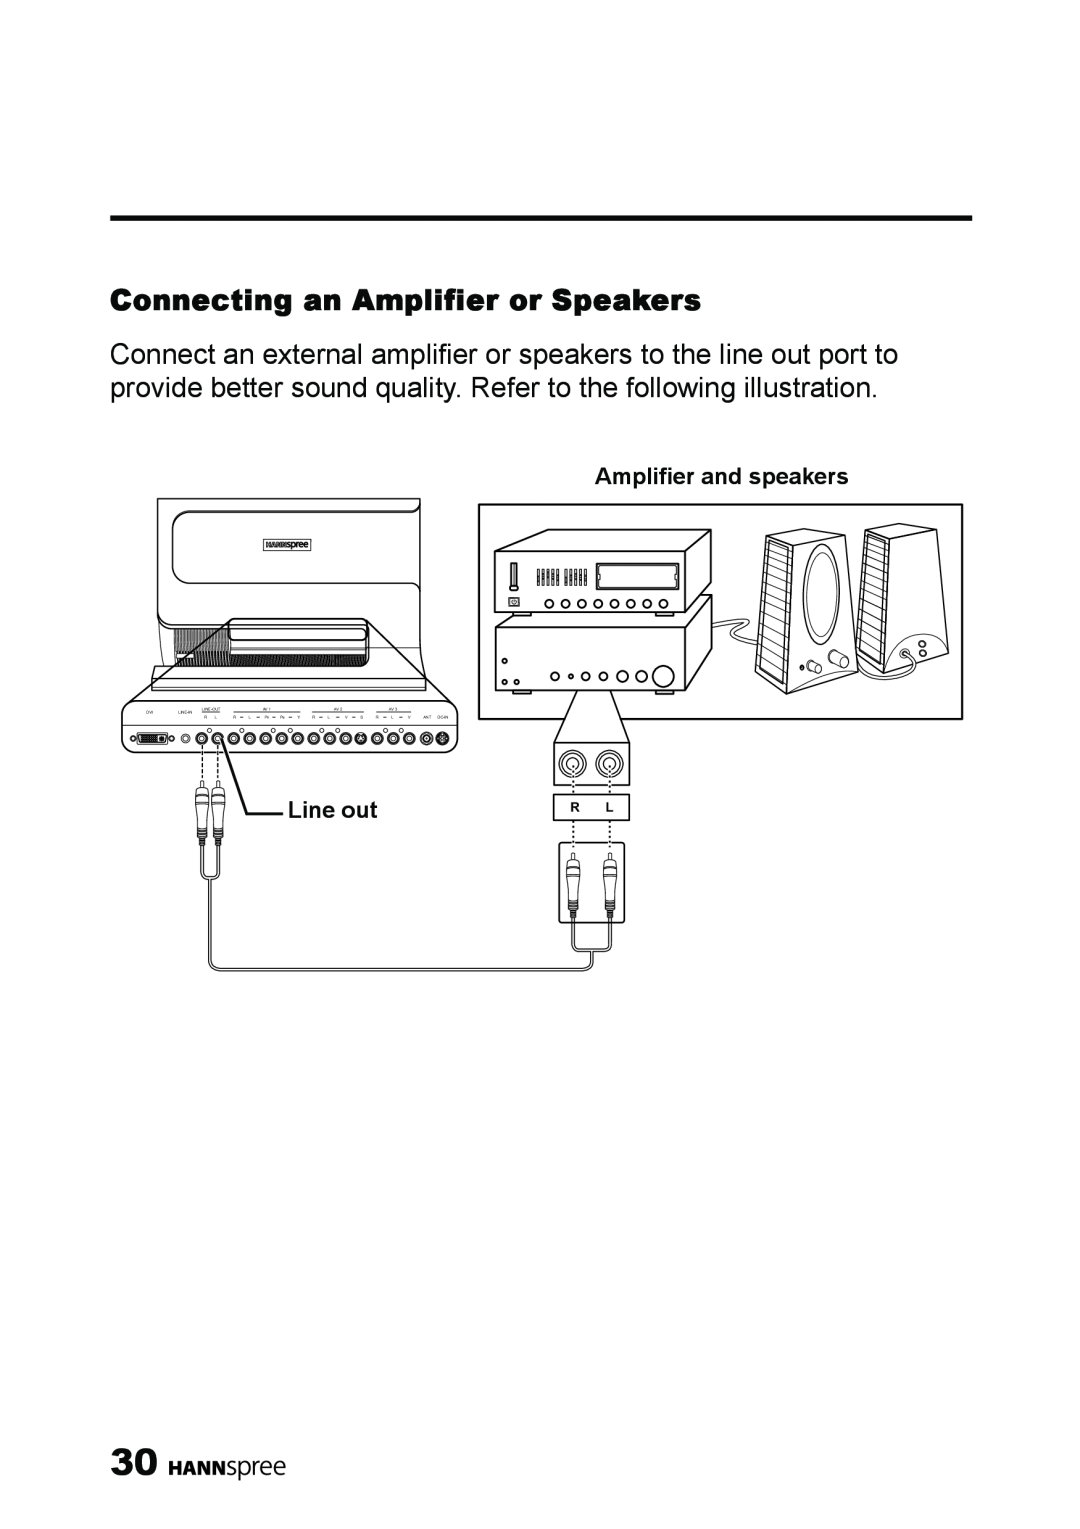 HANNspree LT11-23A1 user manual Connecting an Amplifier or Speakers, Amplifier and speakers, Line out 